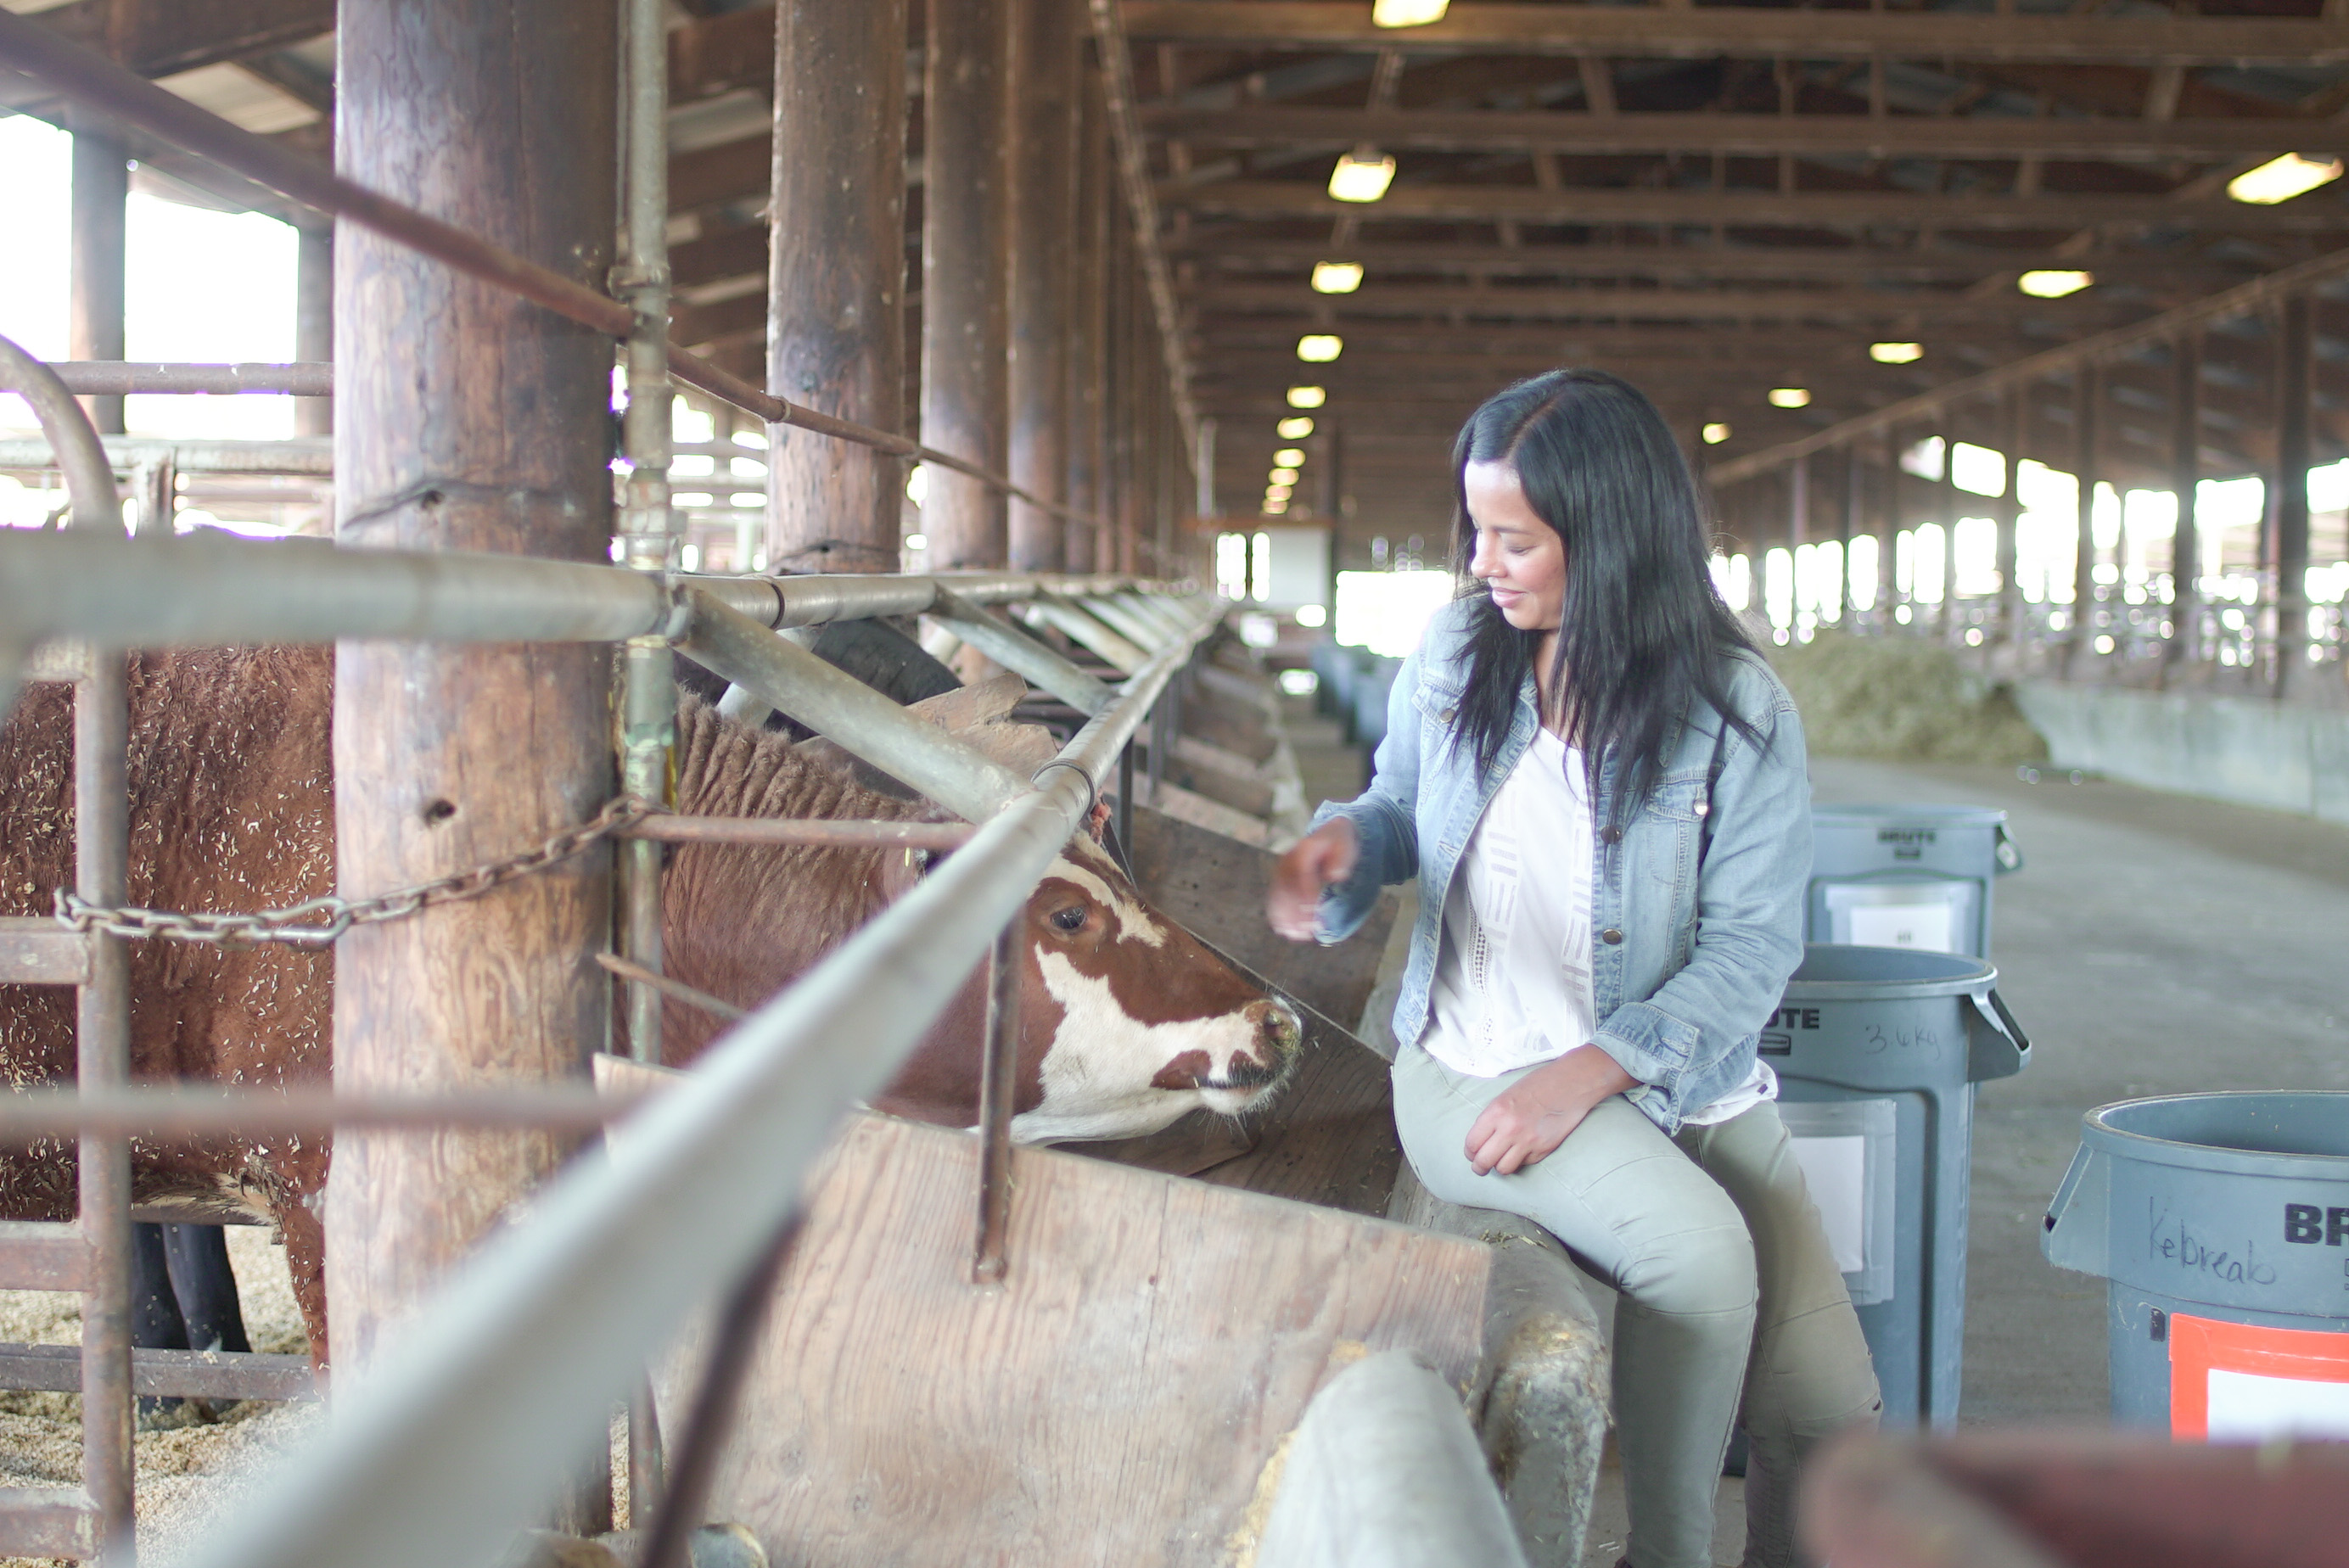 Liz Bonnin stroking a cow behind a metal frame in a farm. Liz encourages us to lower our meat intake to make a big difference to the planet.